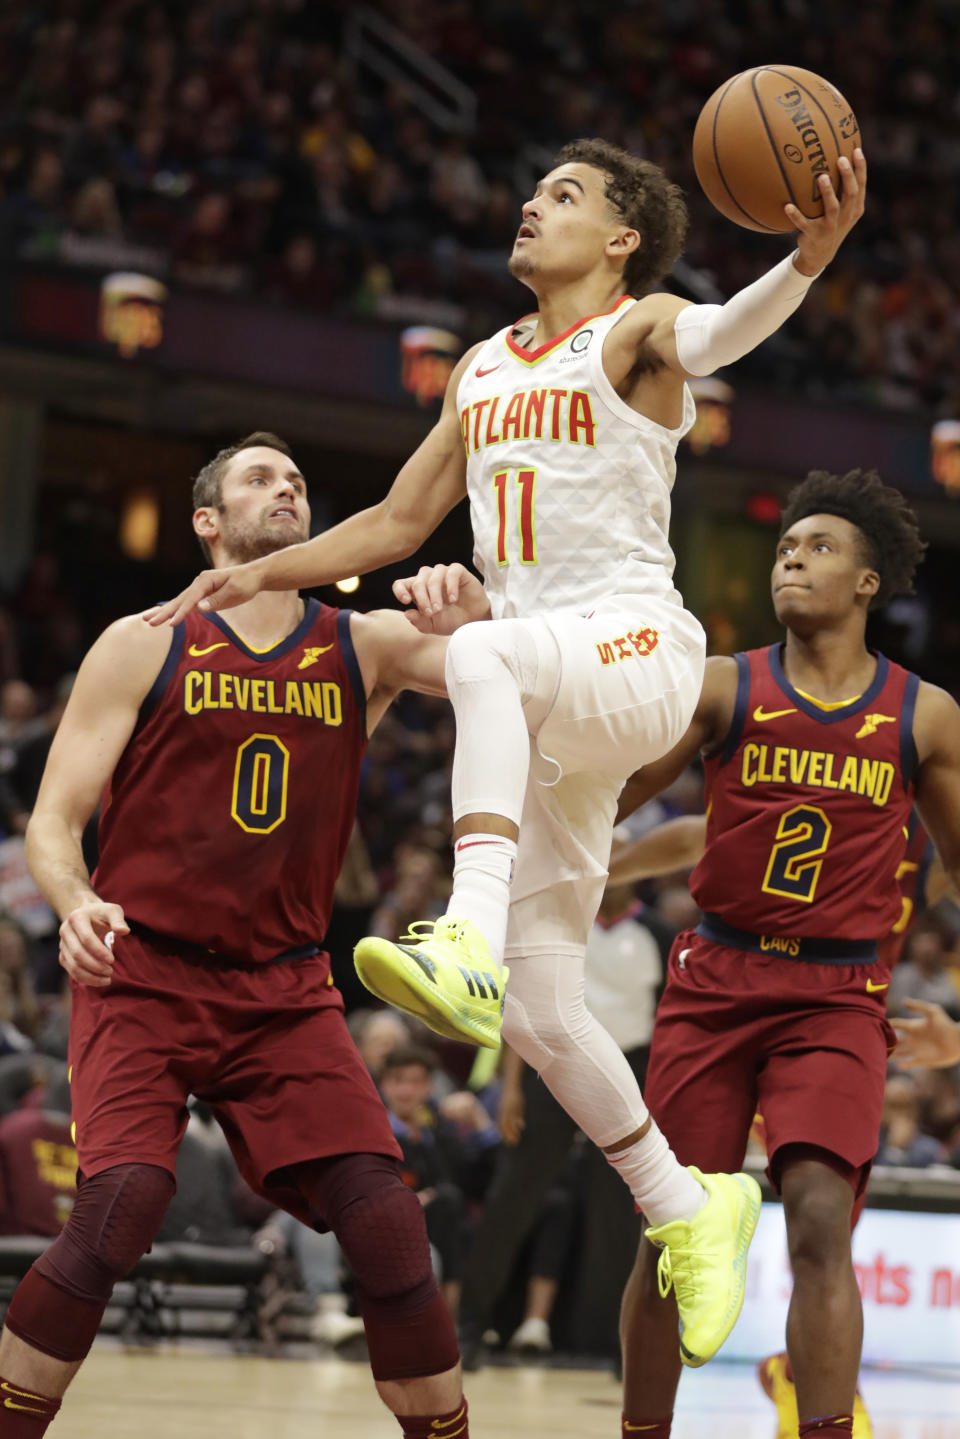 Atlanta Hawks' Trae Young (11) drives to the basket against Cleveland Cavaliers' Kevin Love (0) in the second half of an NBA basketball game, Sunday, Oct. 21, 2018, in Cleveland. (AP Photo/Tony Dejak)